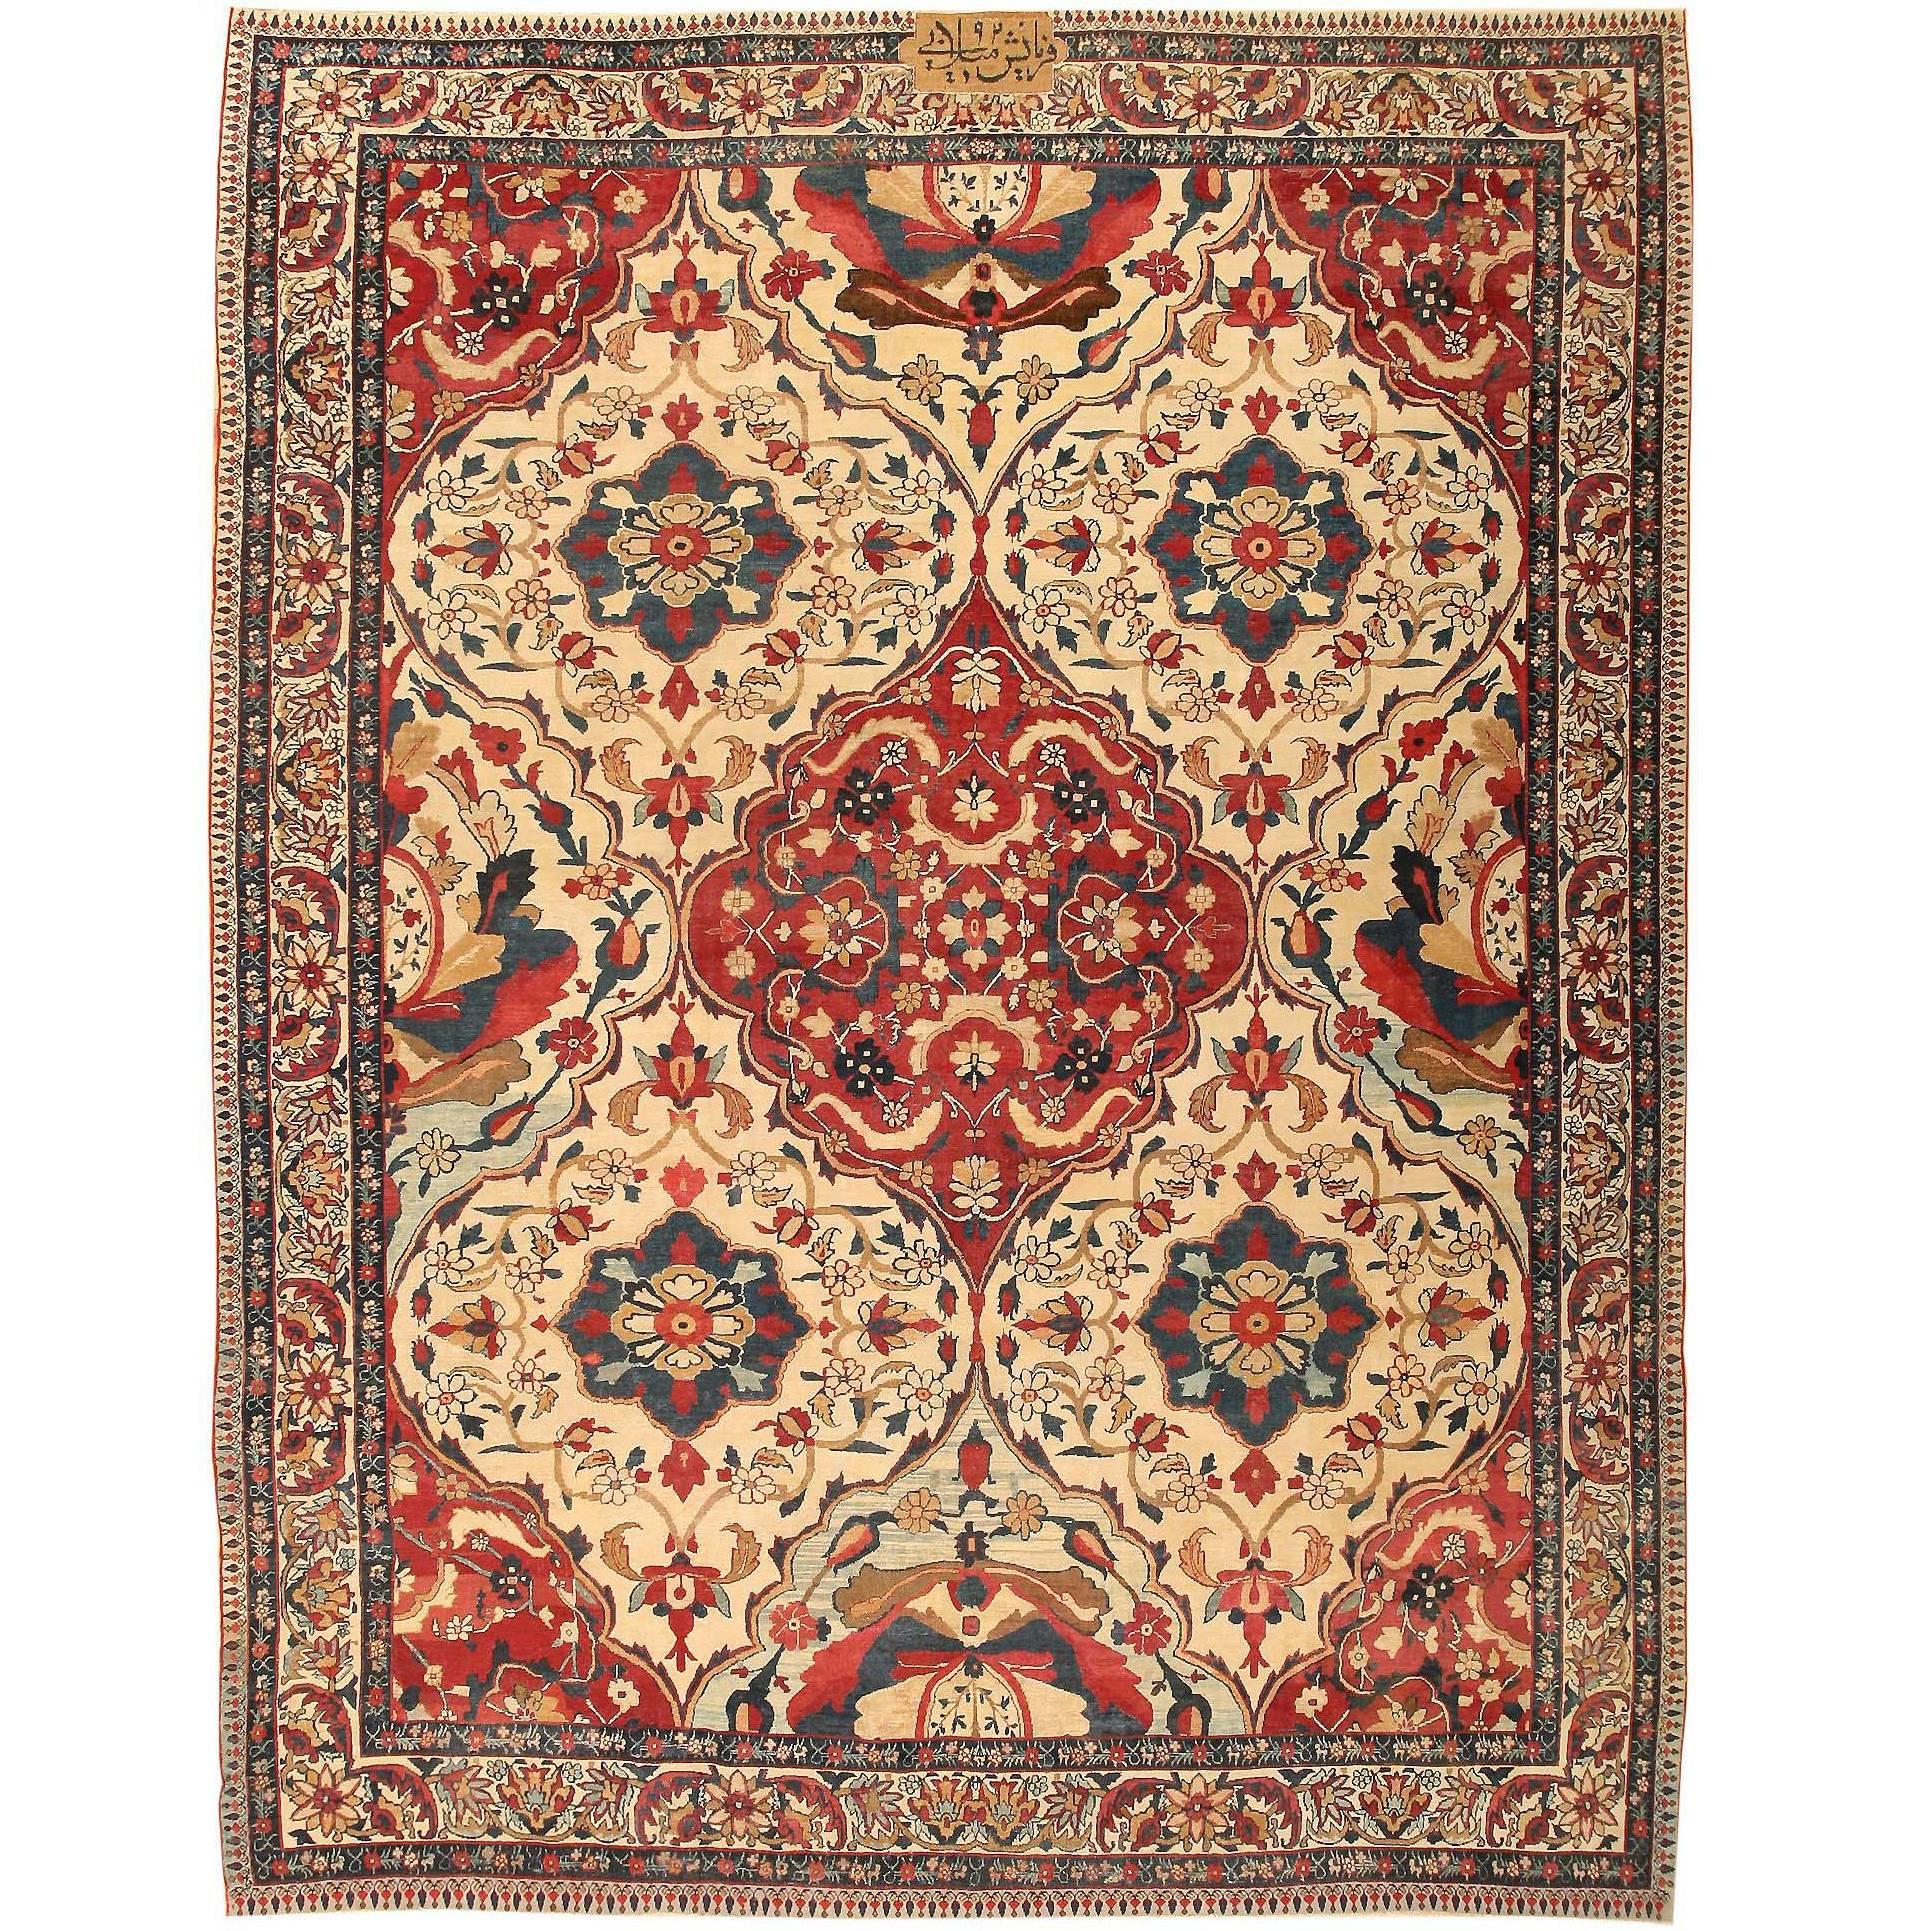 Antique Persian Kerman Rug. Size: 9 ft x 11 ft 6 in (2.74 m x 3.51 m)